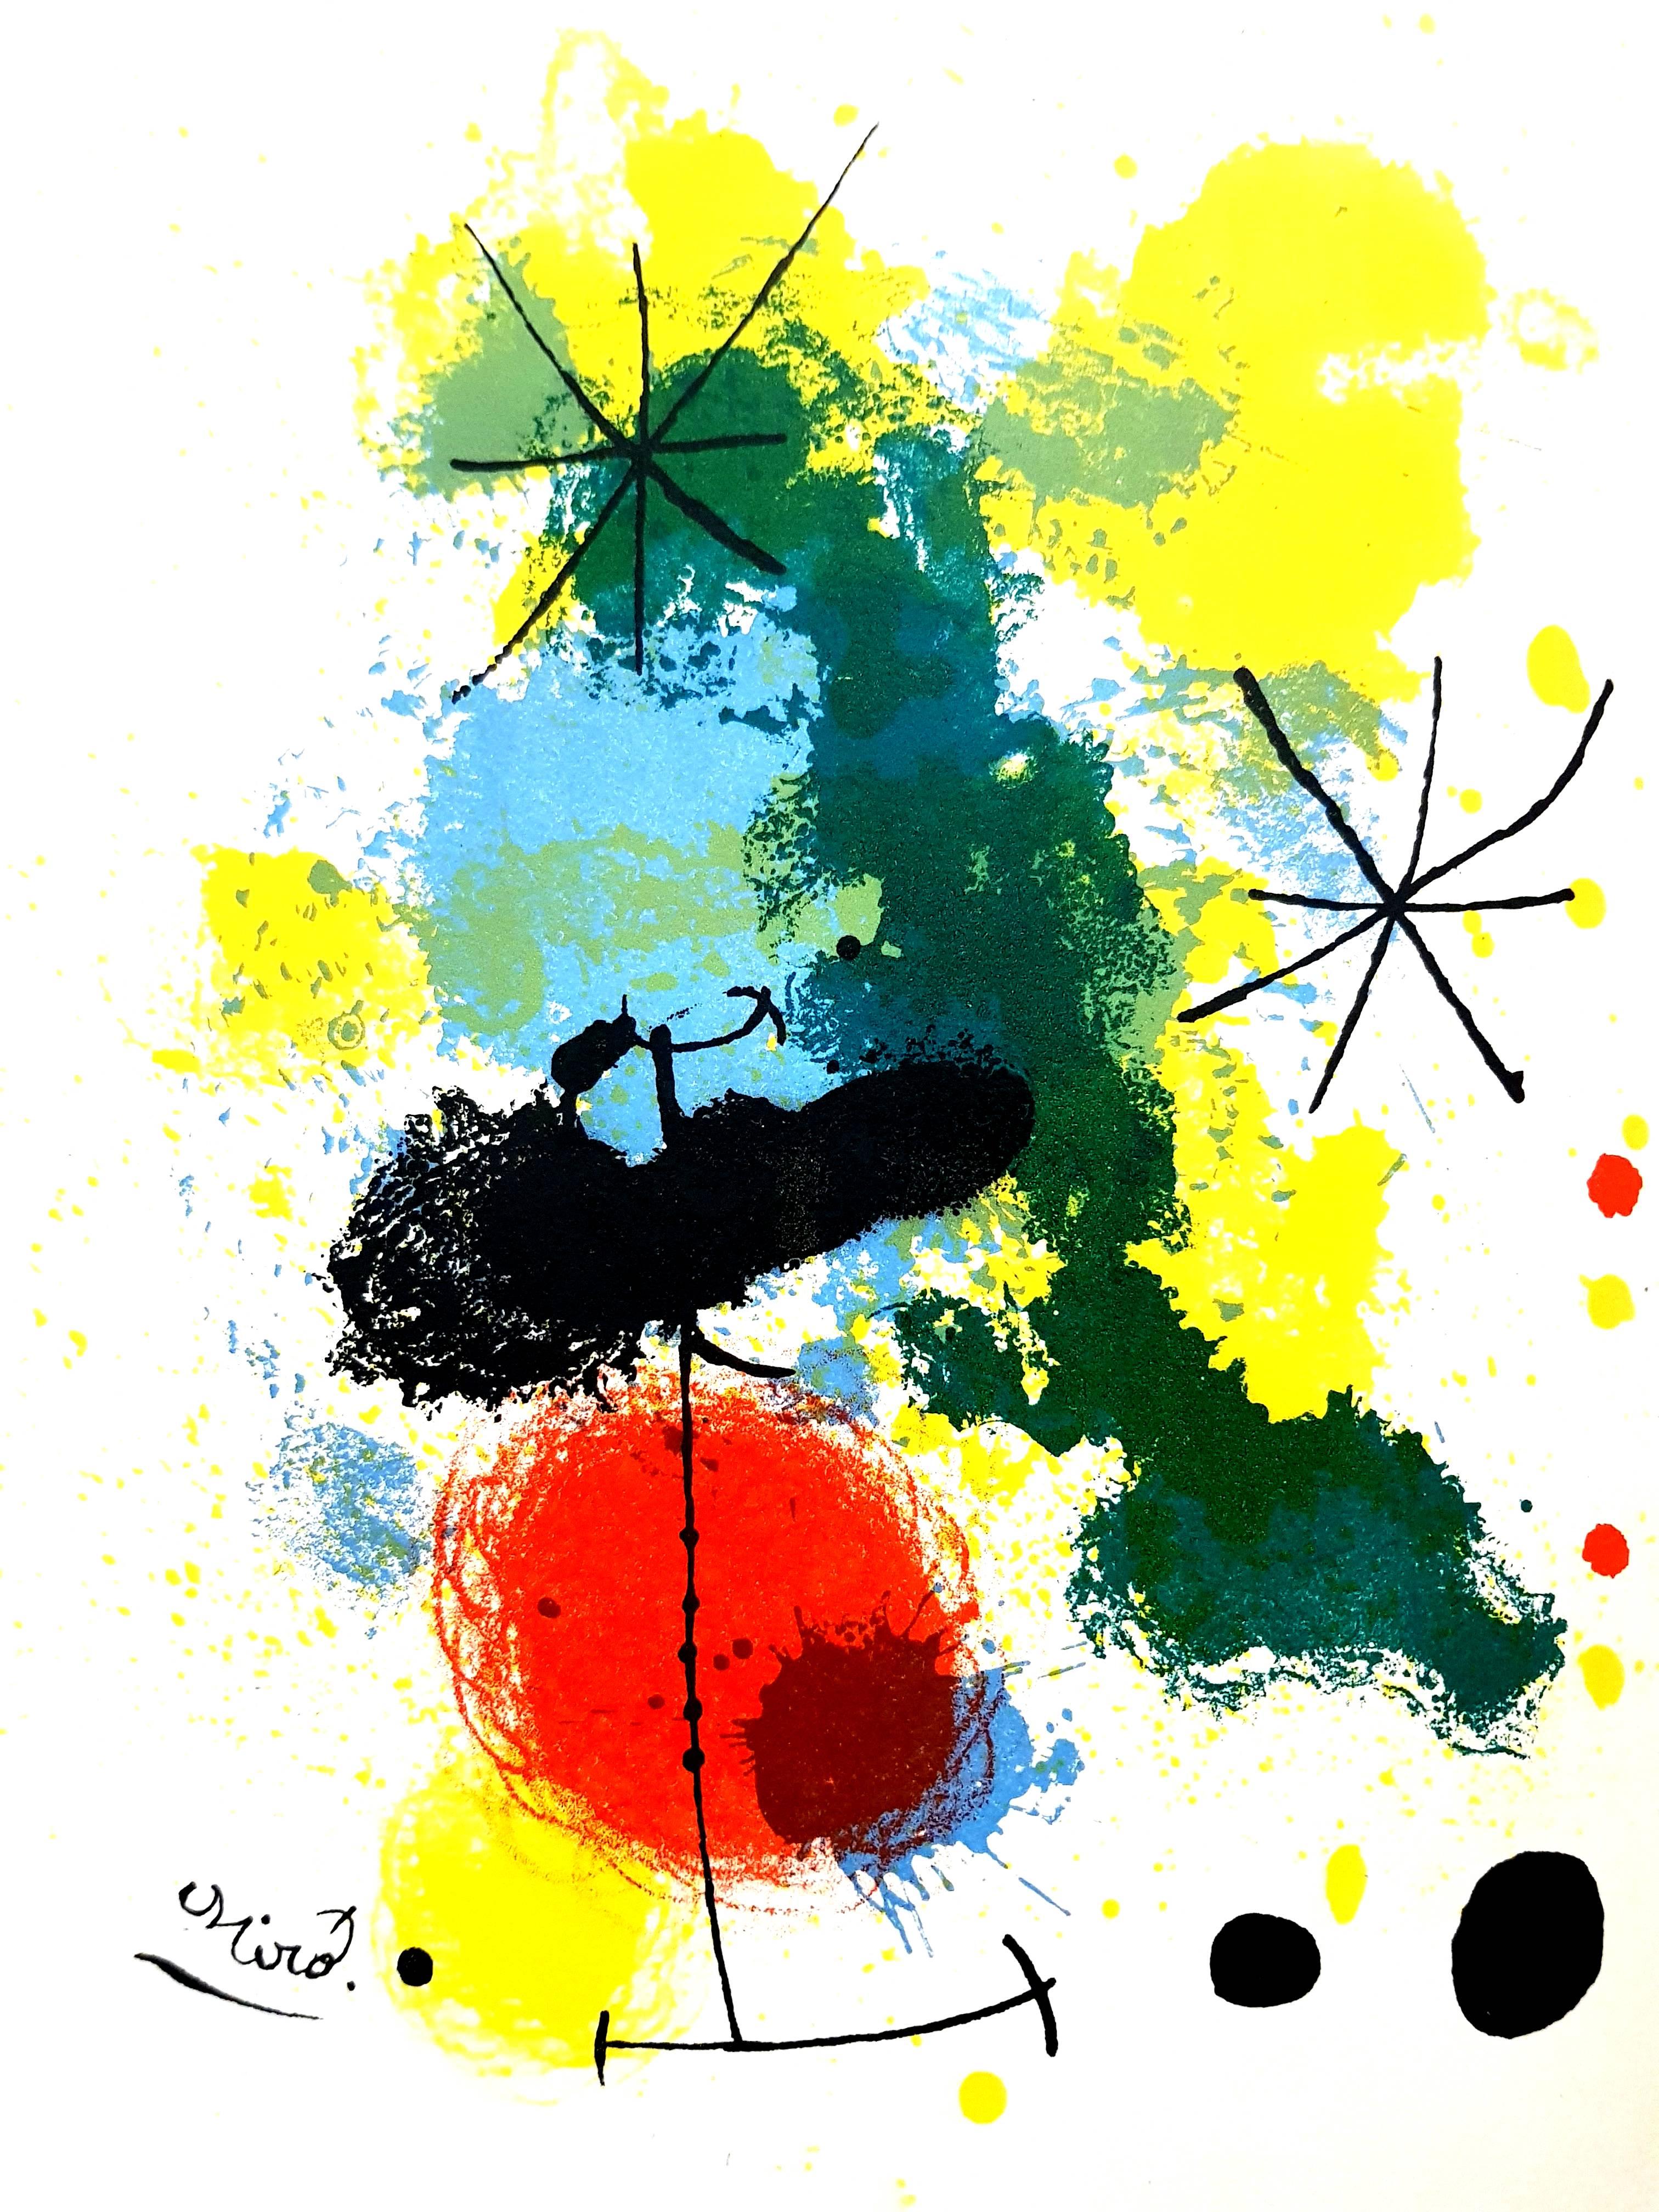 Joan Miro - Original Lithograph - Frontispiece for "Prints from Mourlot Press"